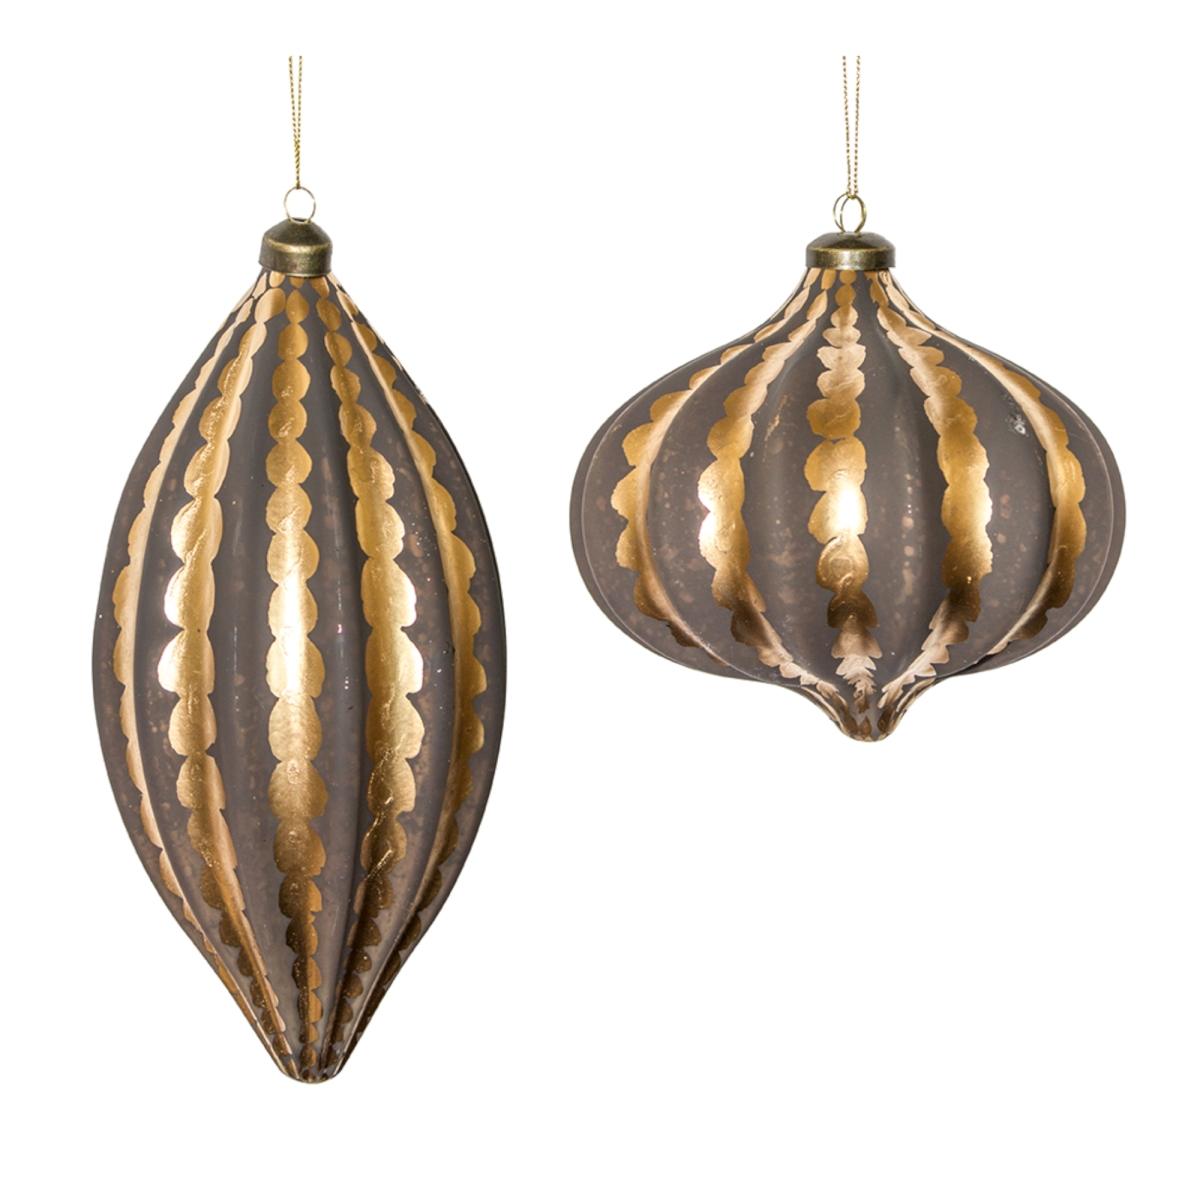 73092ds 6.5-10.25 In. Glass Ornament, Gold & Brown - Set Of 4